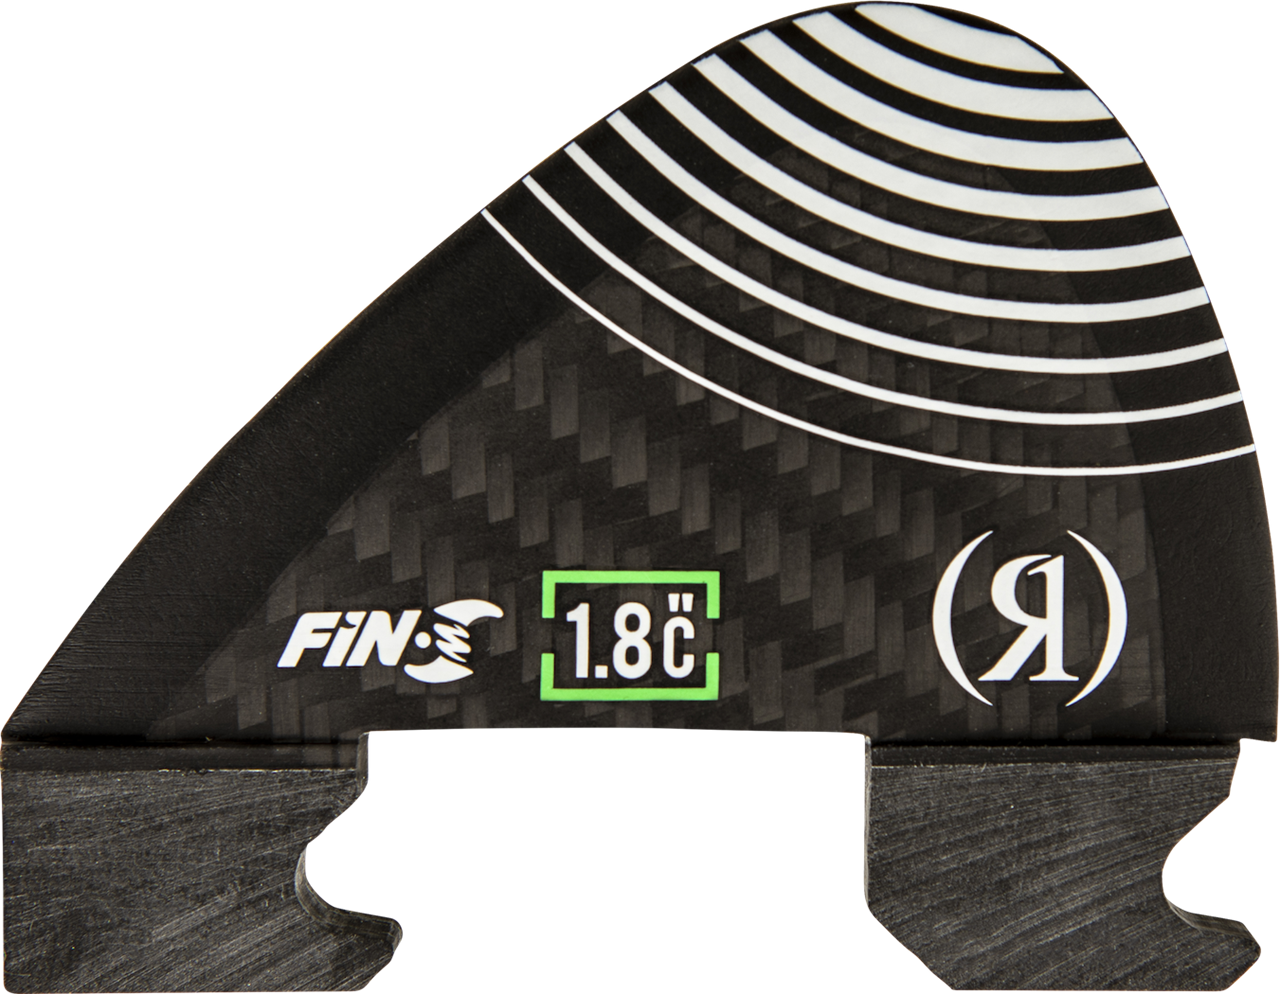 1.8 in. - Floating Fin-S 2.0 - Nub Surf Fin